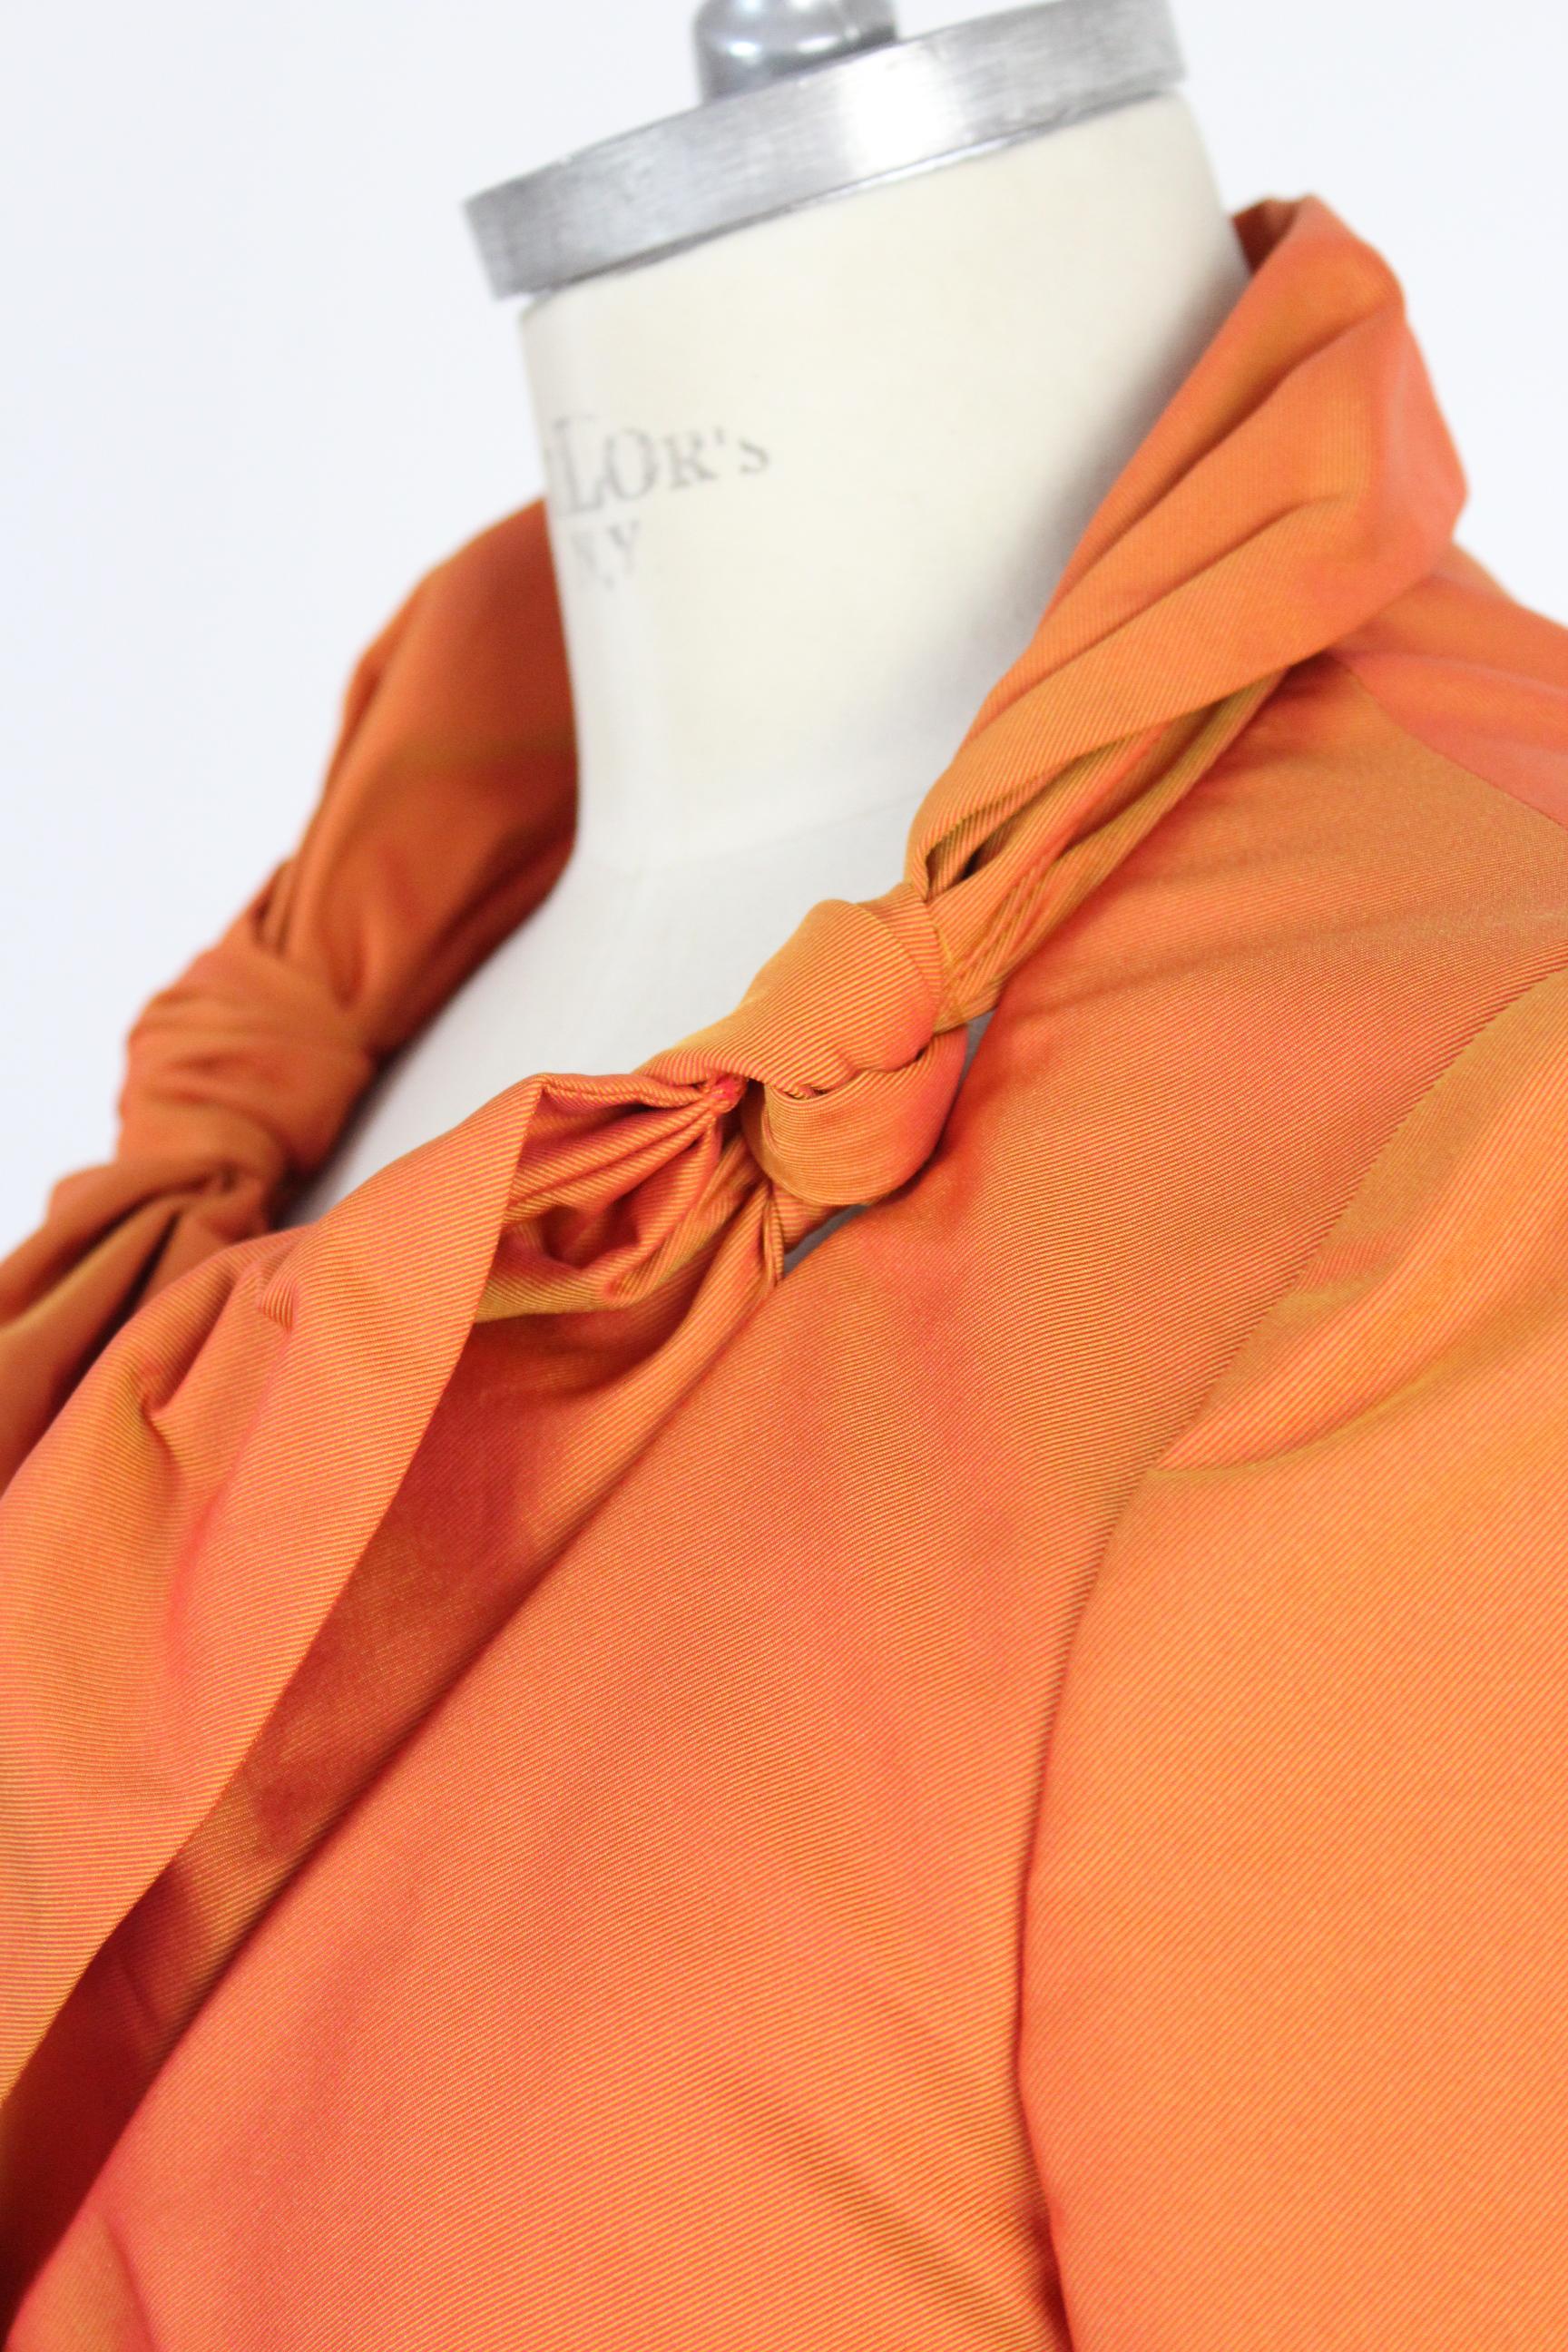 Moschino Cheap and Chic Orange Fitted Classic Dinner Jacket In Excellent Condition In Brindisi, Bt